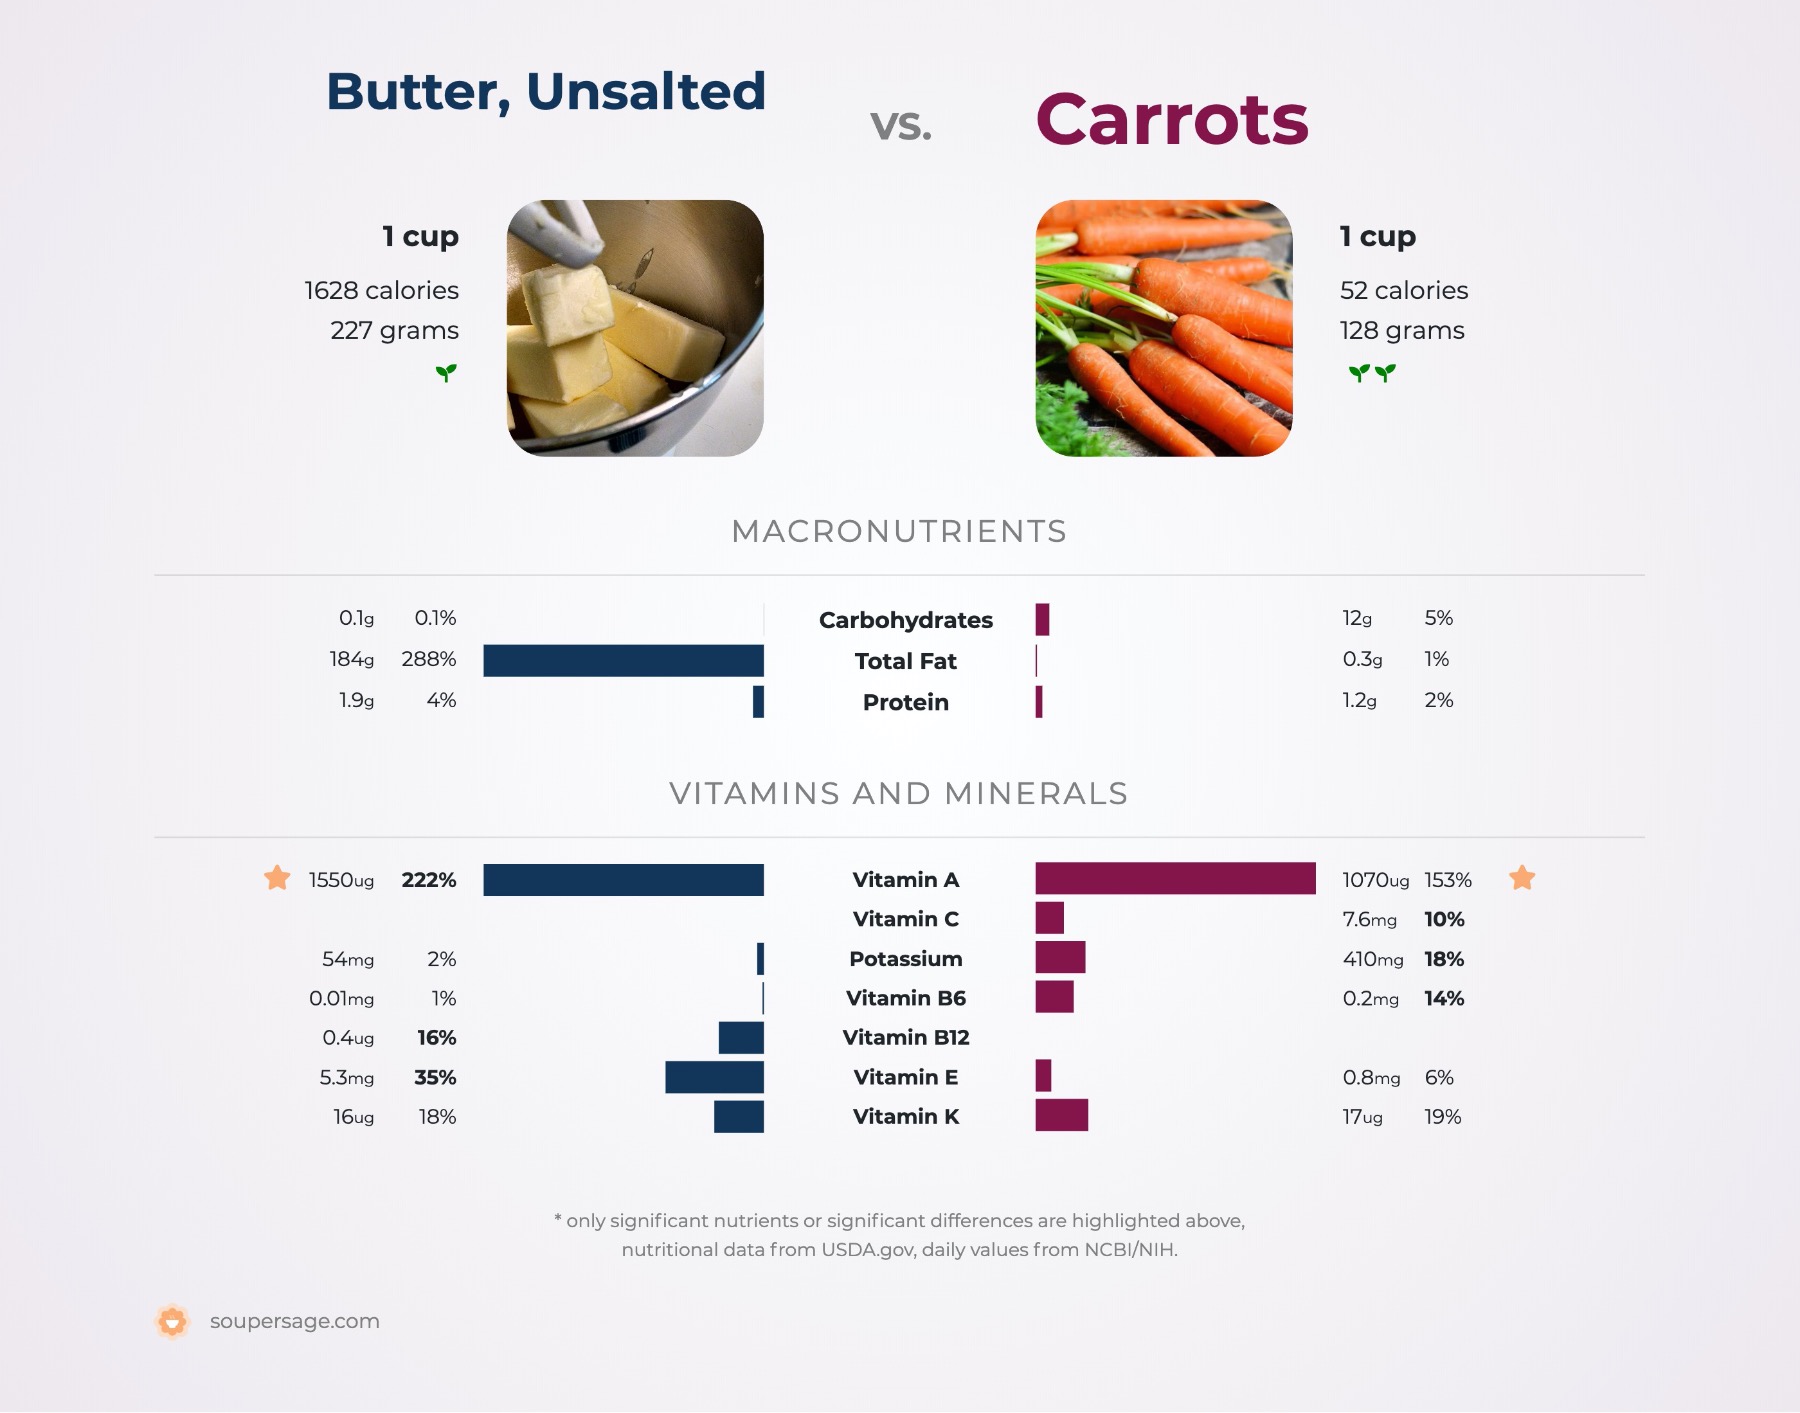 nutrition comparison of butter, unsalted vs. carrots